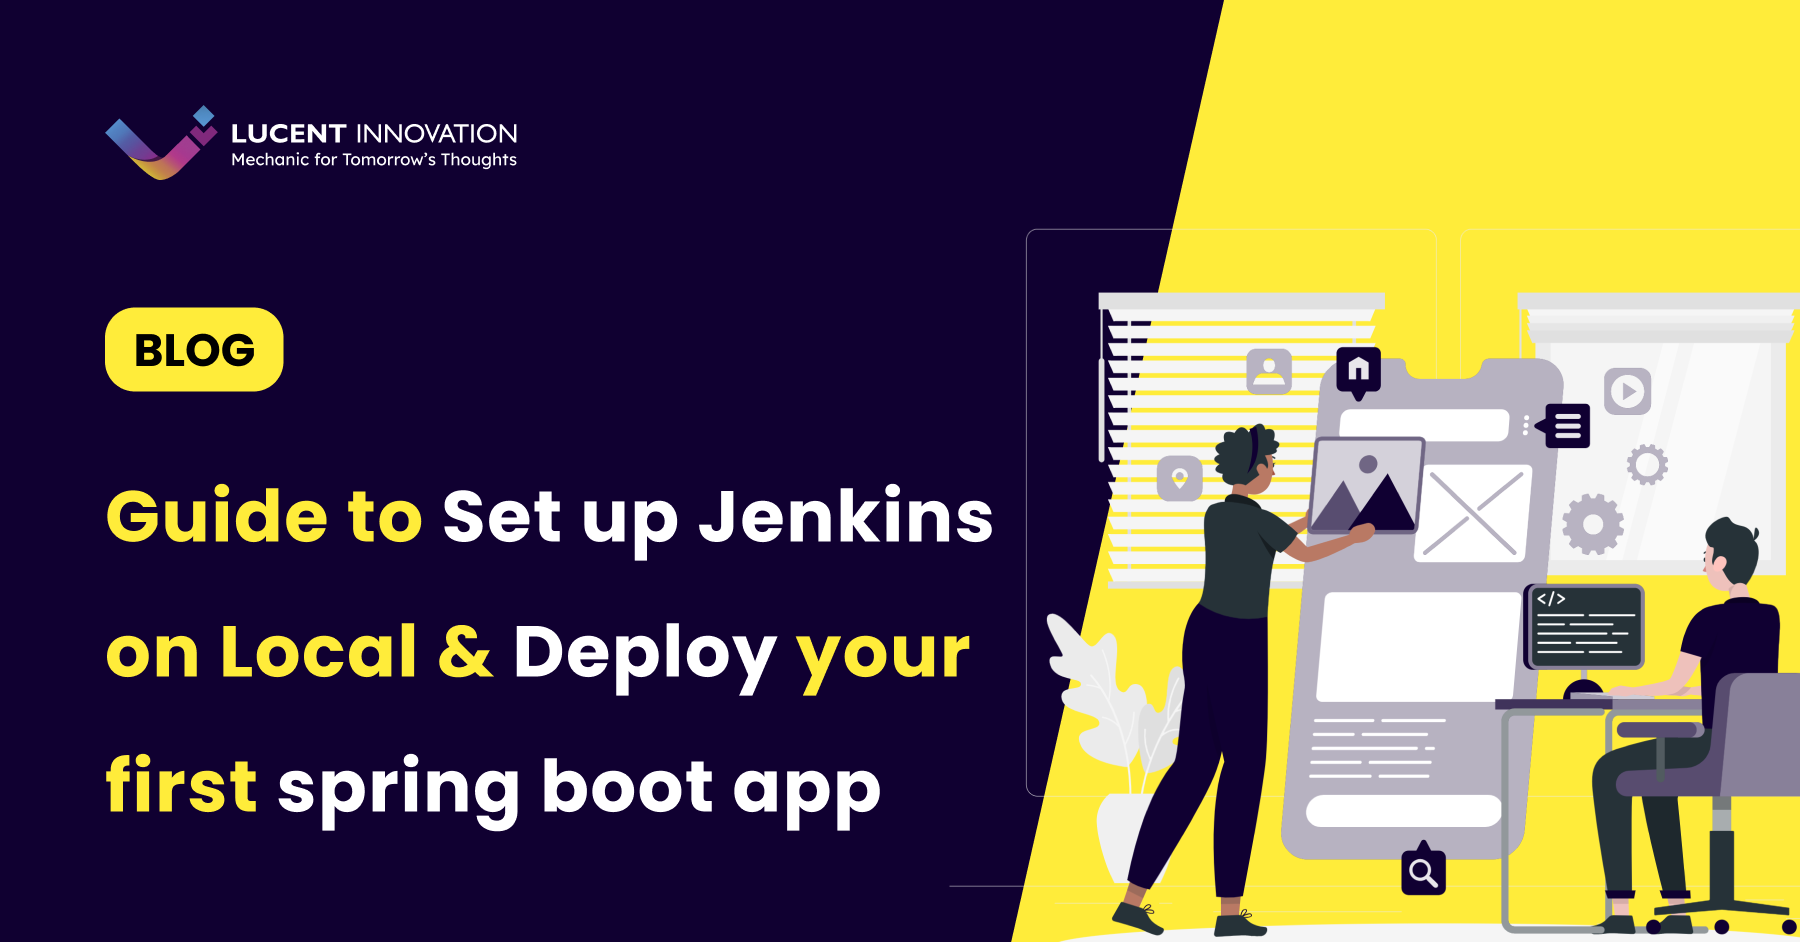 Guide to Set up Jenkins on Local & Deploy Your First Spring Boot App